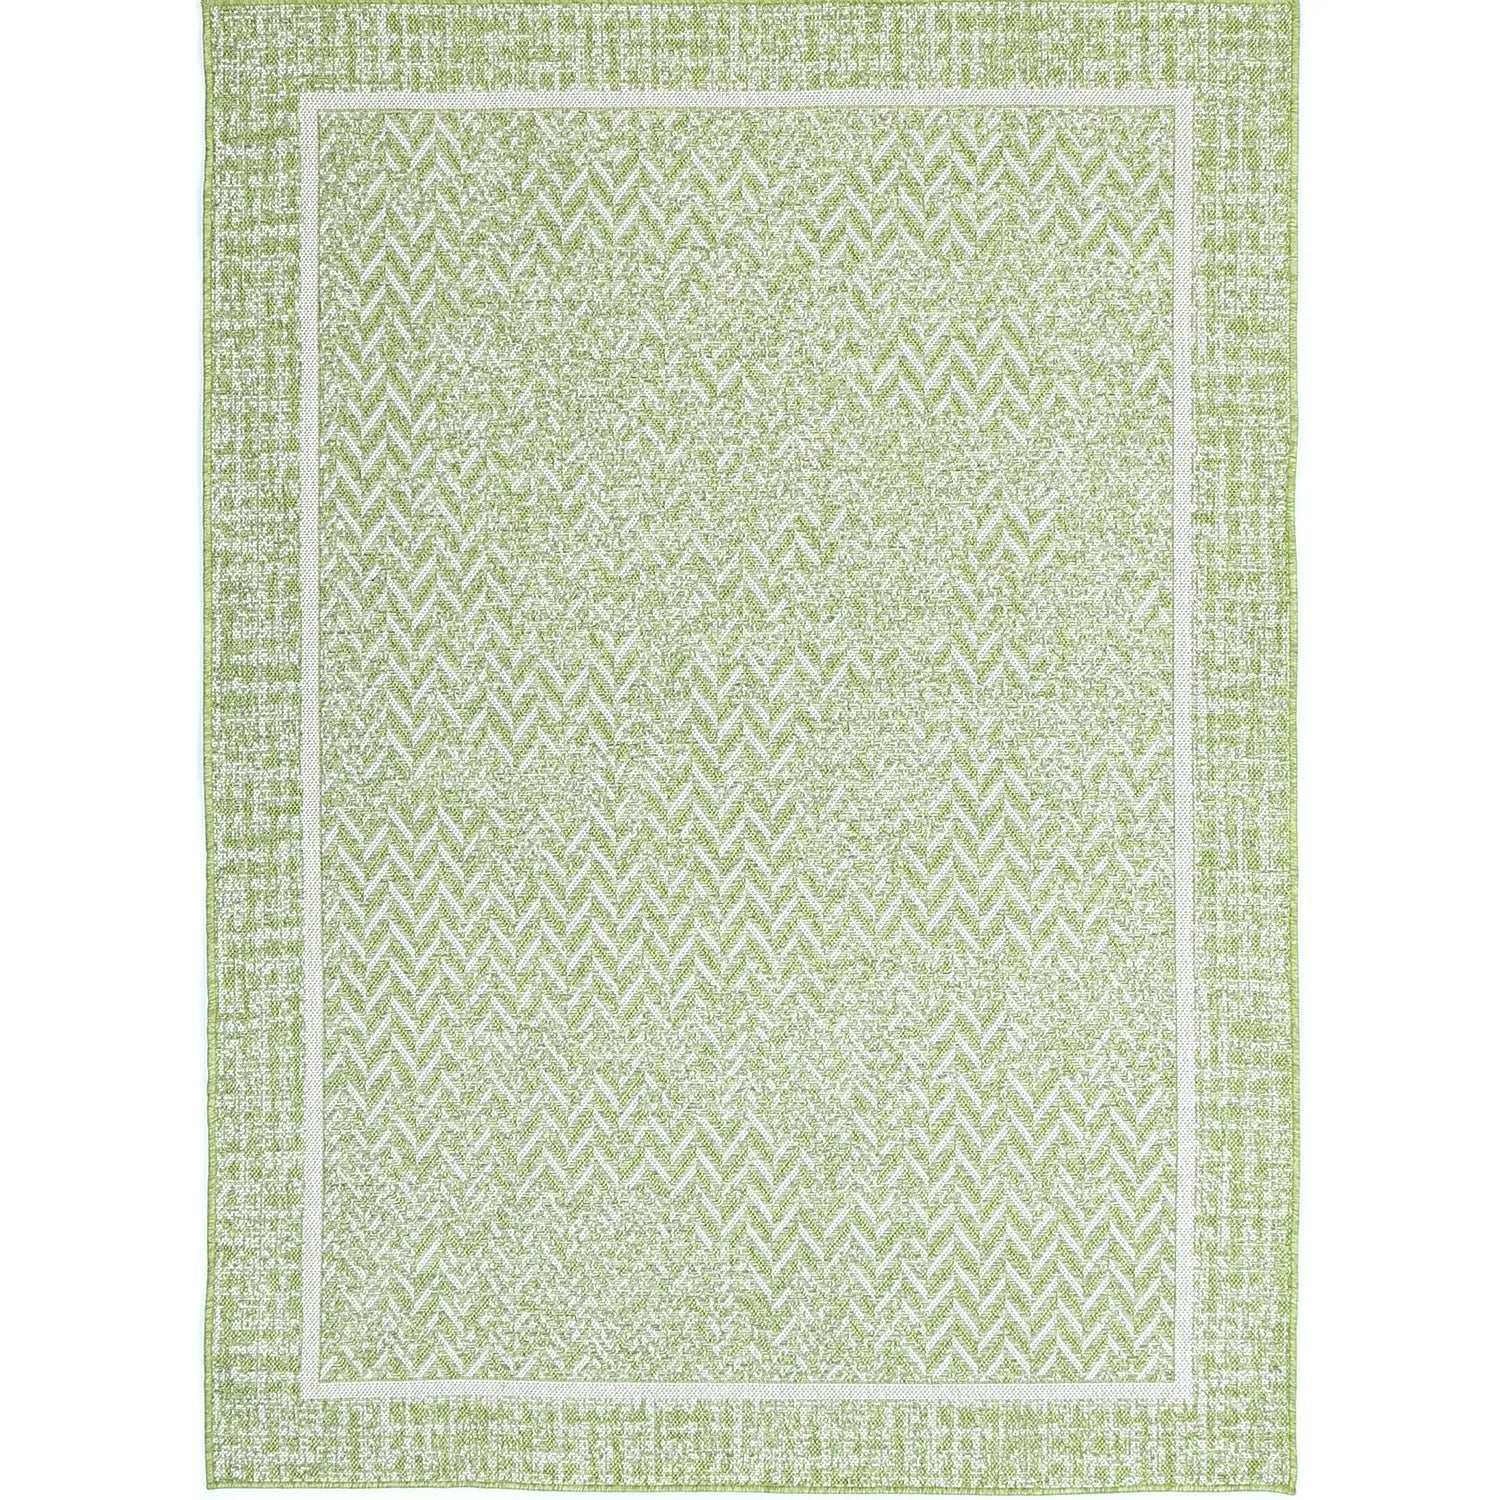 Temple Border Green Outdoor Rug - Rugs - Rugs a Million